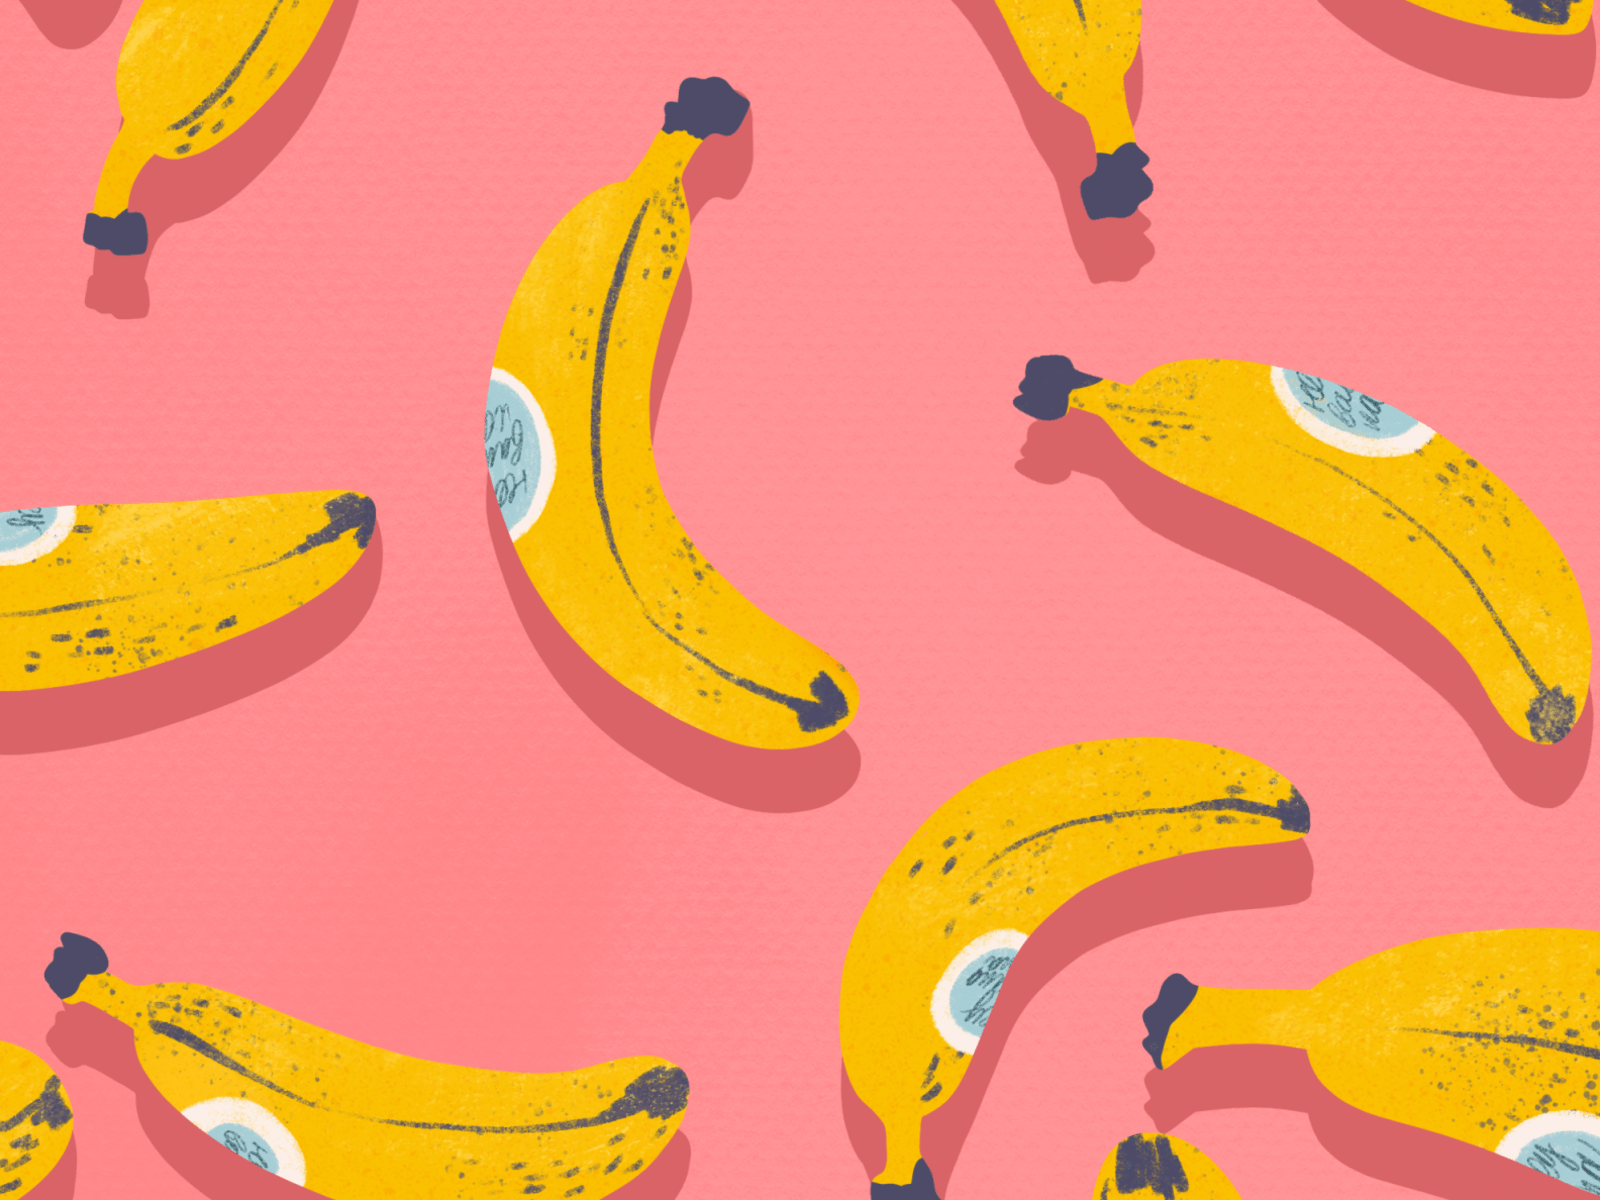 A pattern of bananas on a pink background - Banana